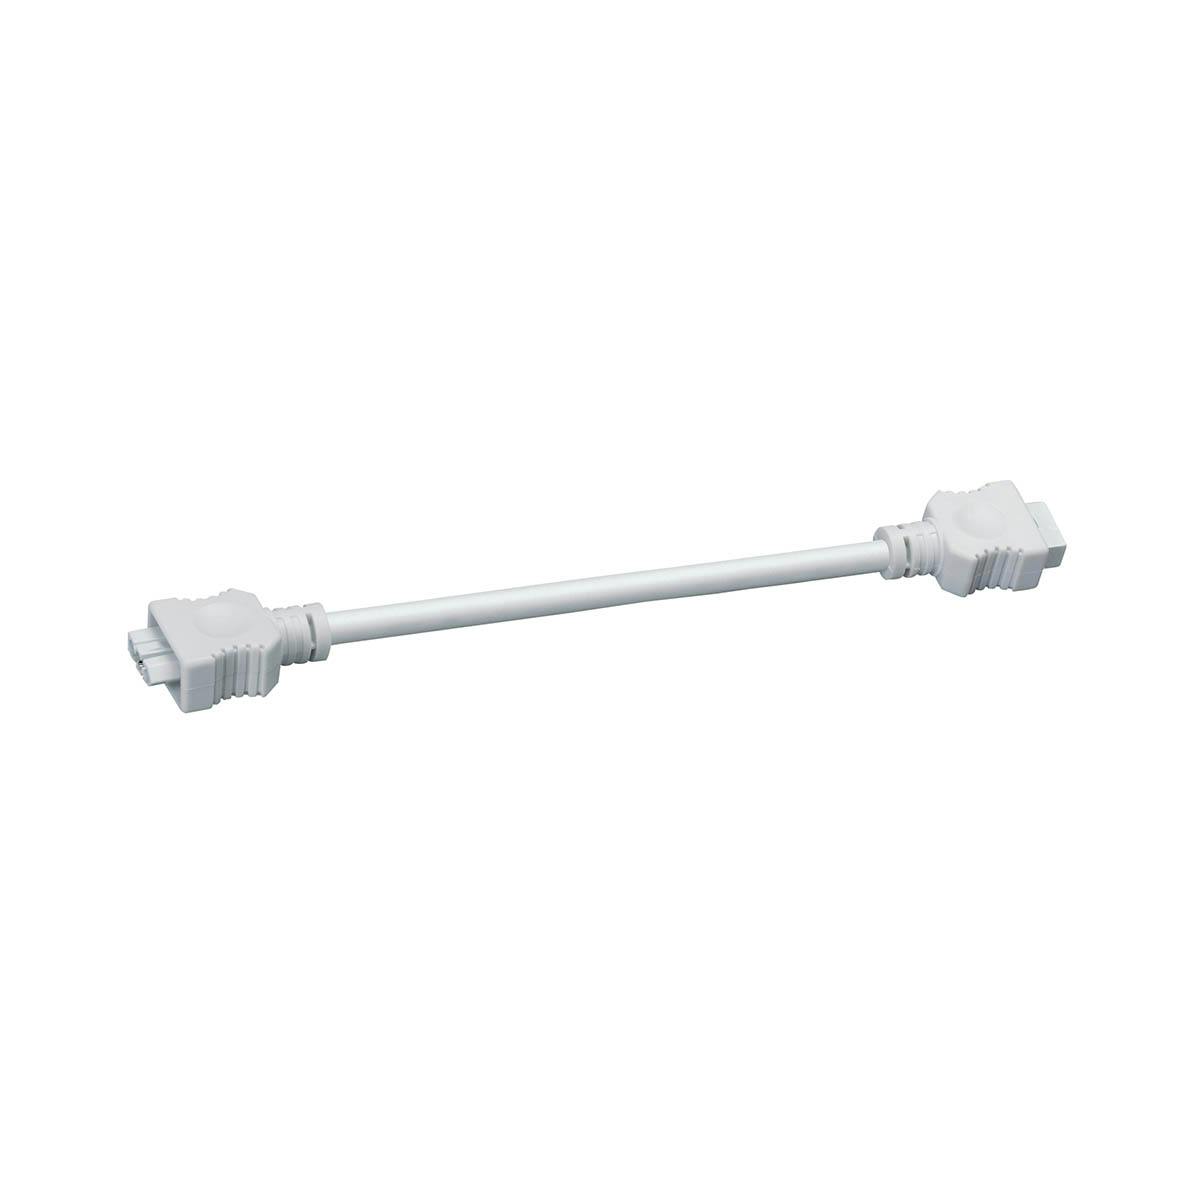 4U/6U 9" Interconnect Cable White on a white background